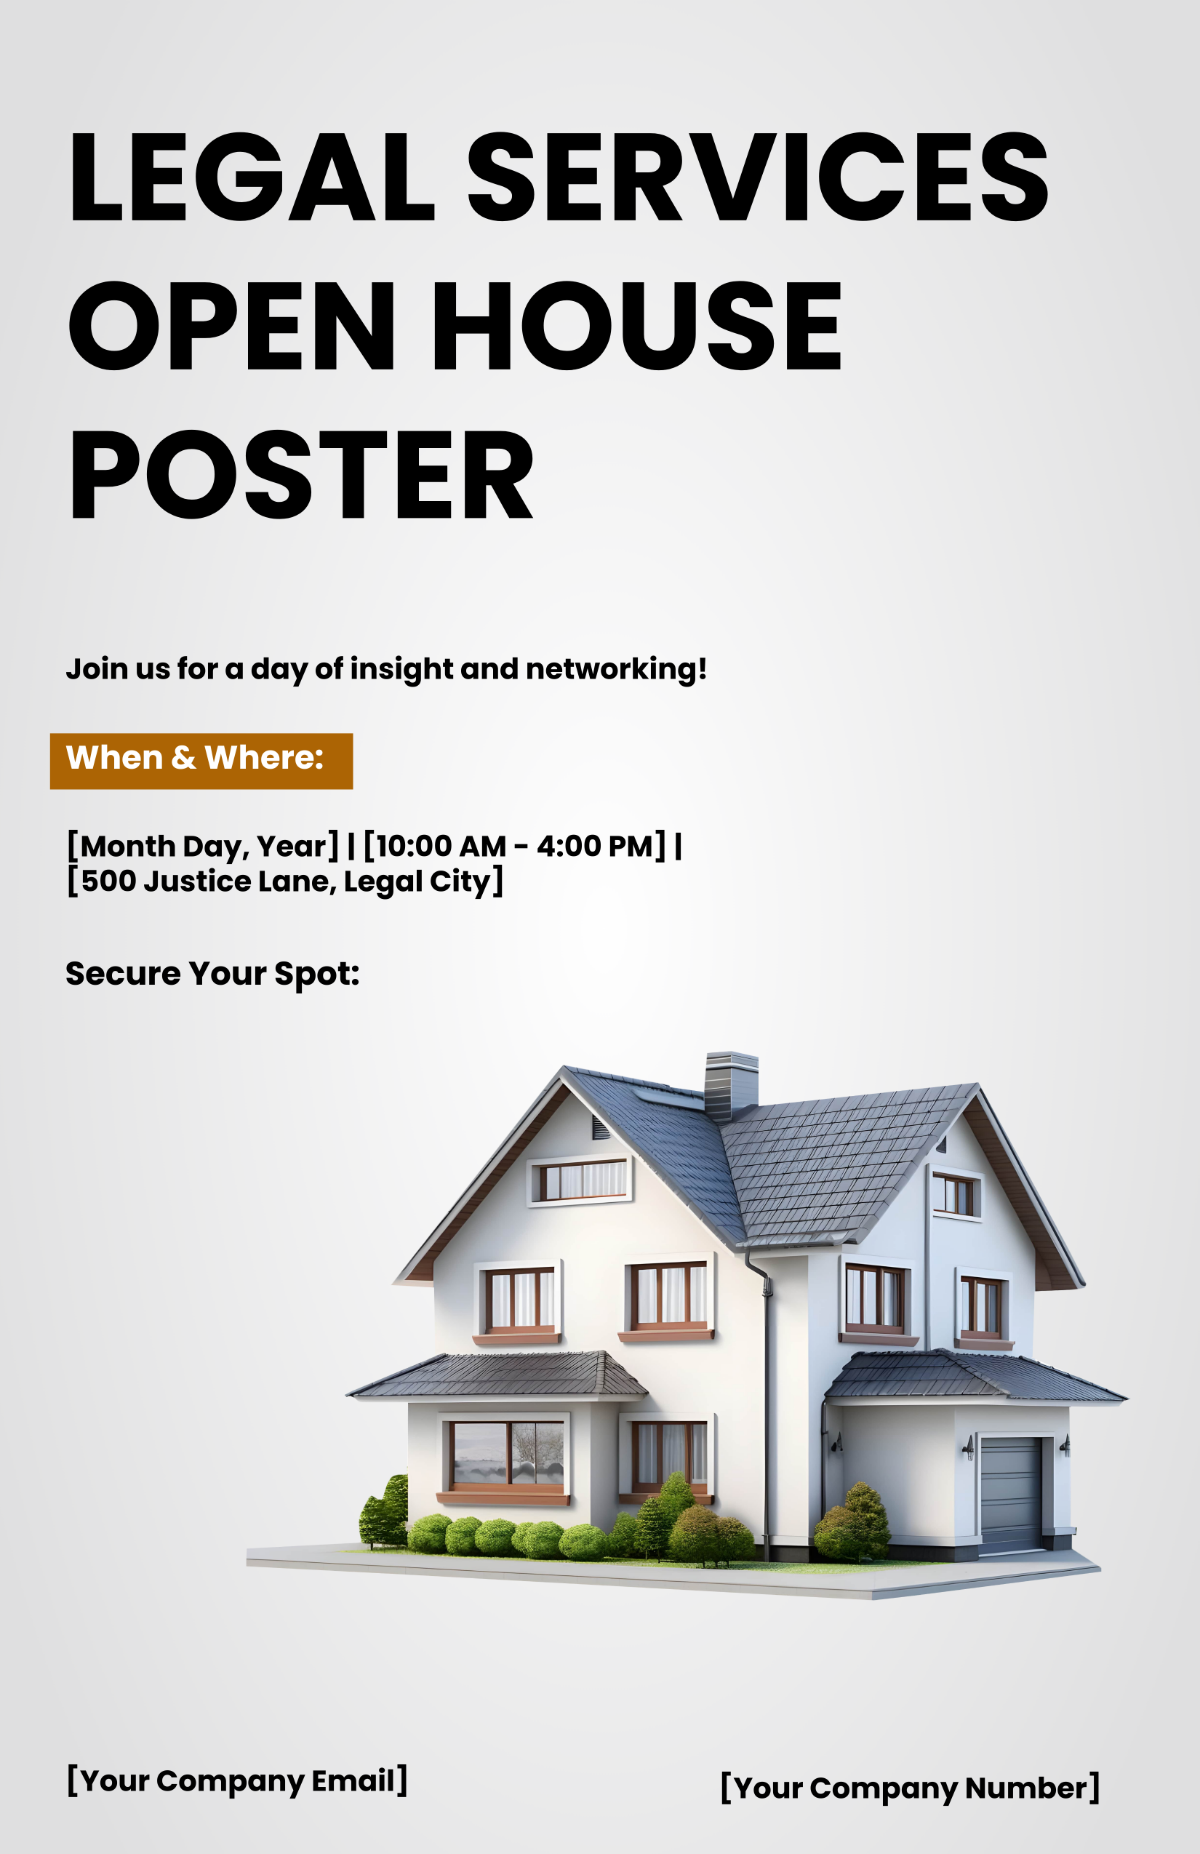 Legal Services Open House Poster